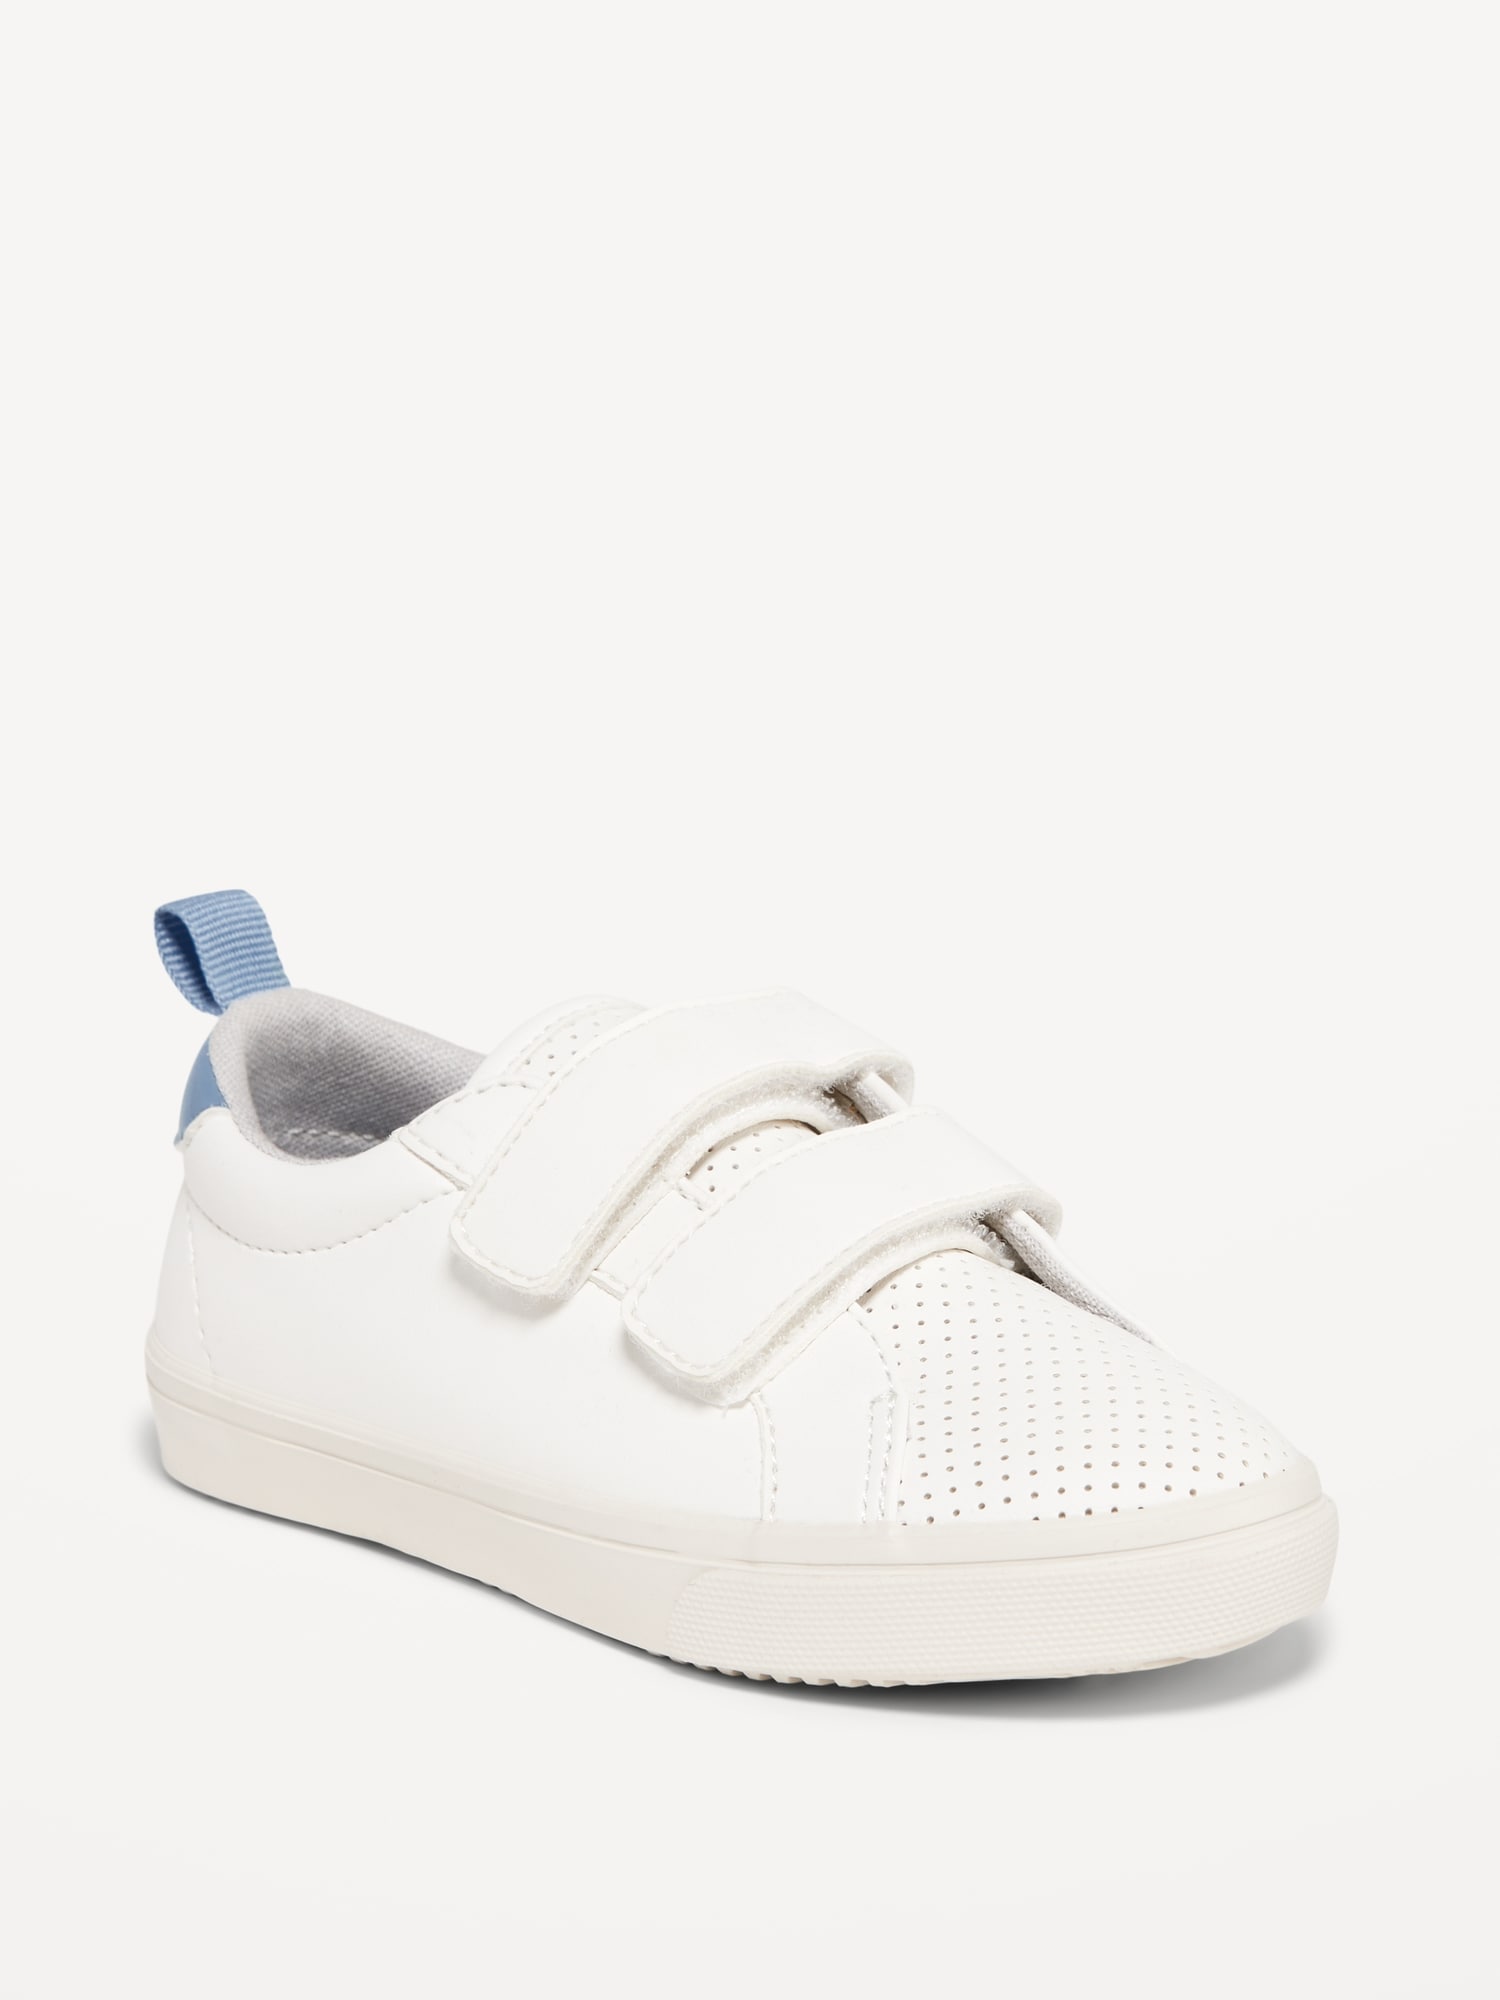 Double Secure-Strap Sneakers for Toddler Boys | Old Navy